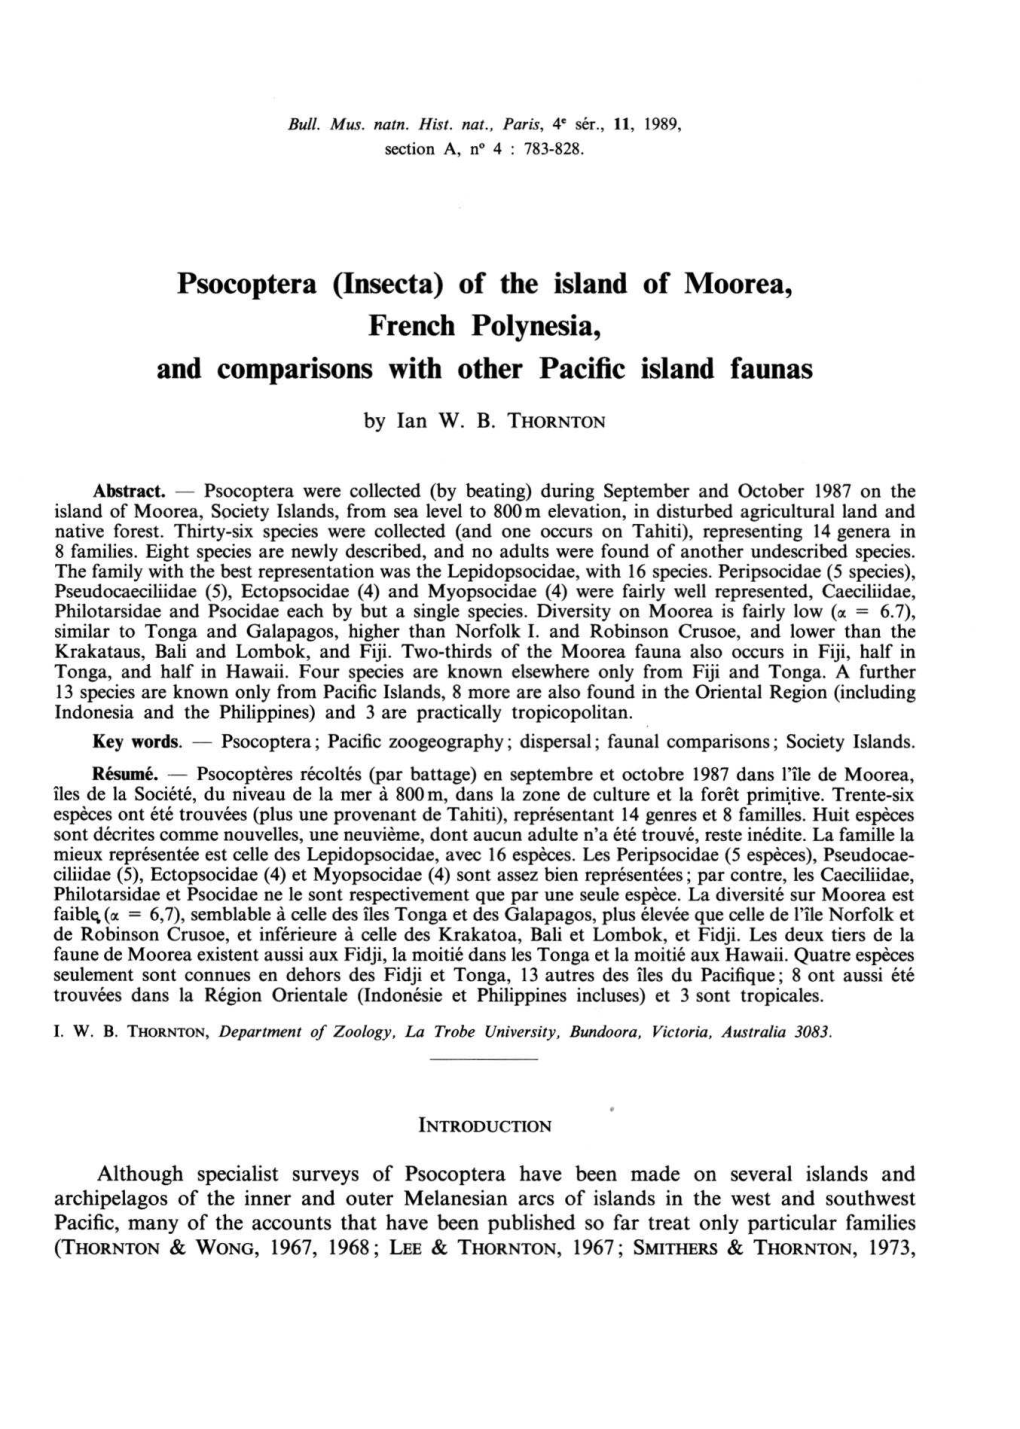 Psocoptera (Insecta) of the Island French Polynesia, and Comparisons with Other Pacific Island Faunas of Moorea